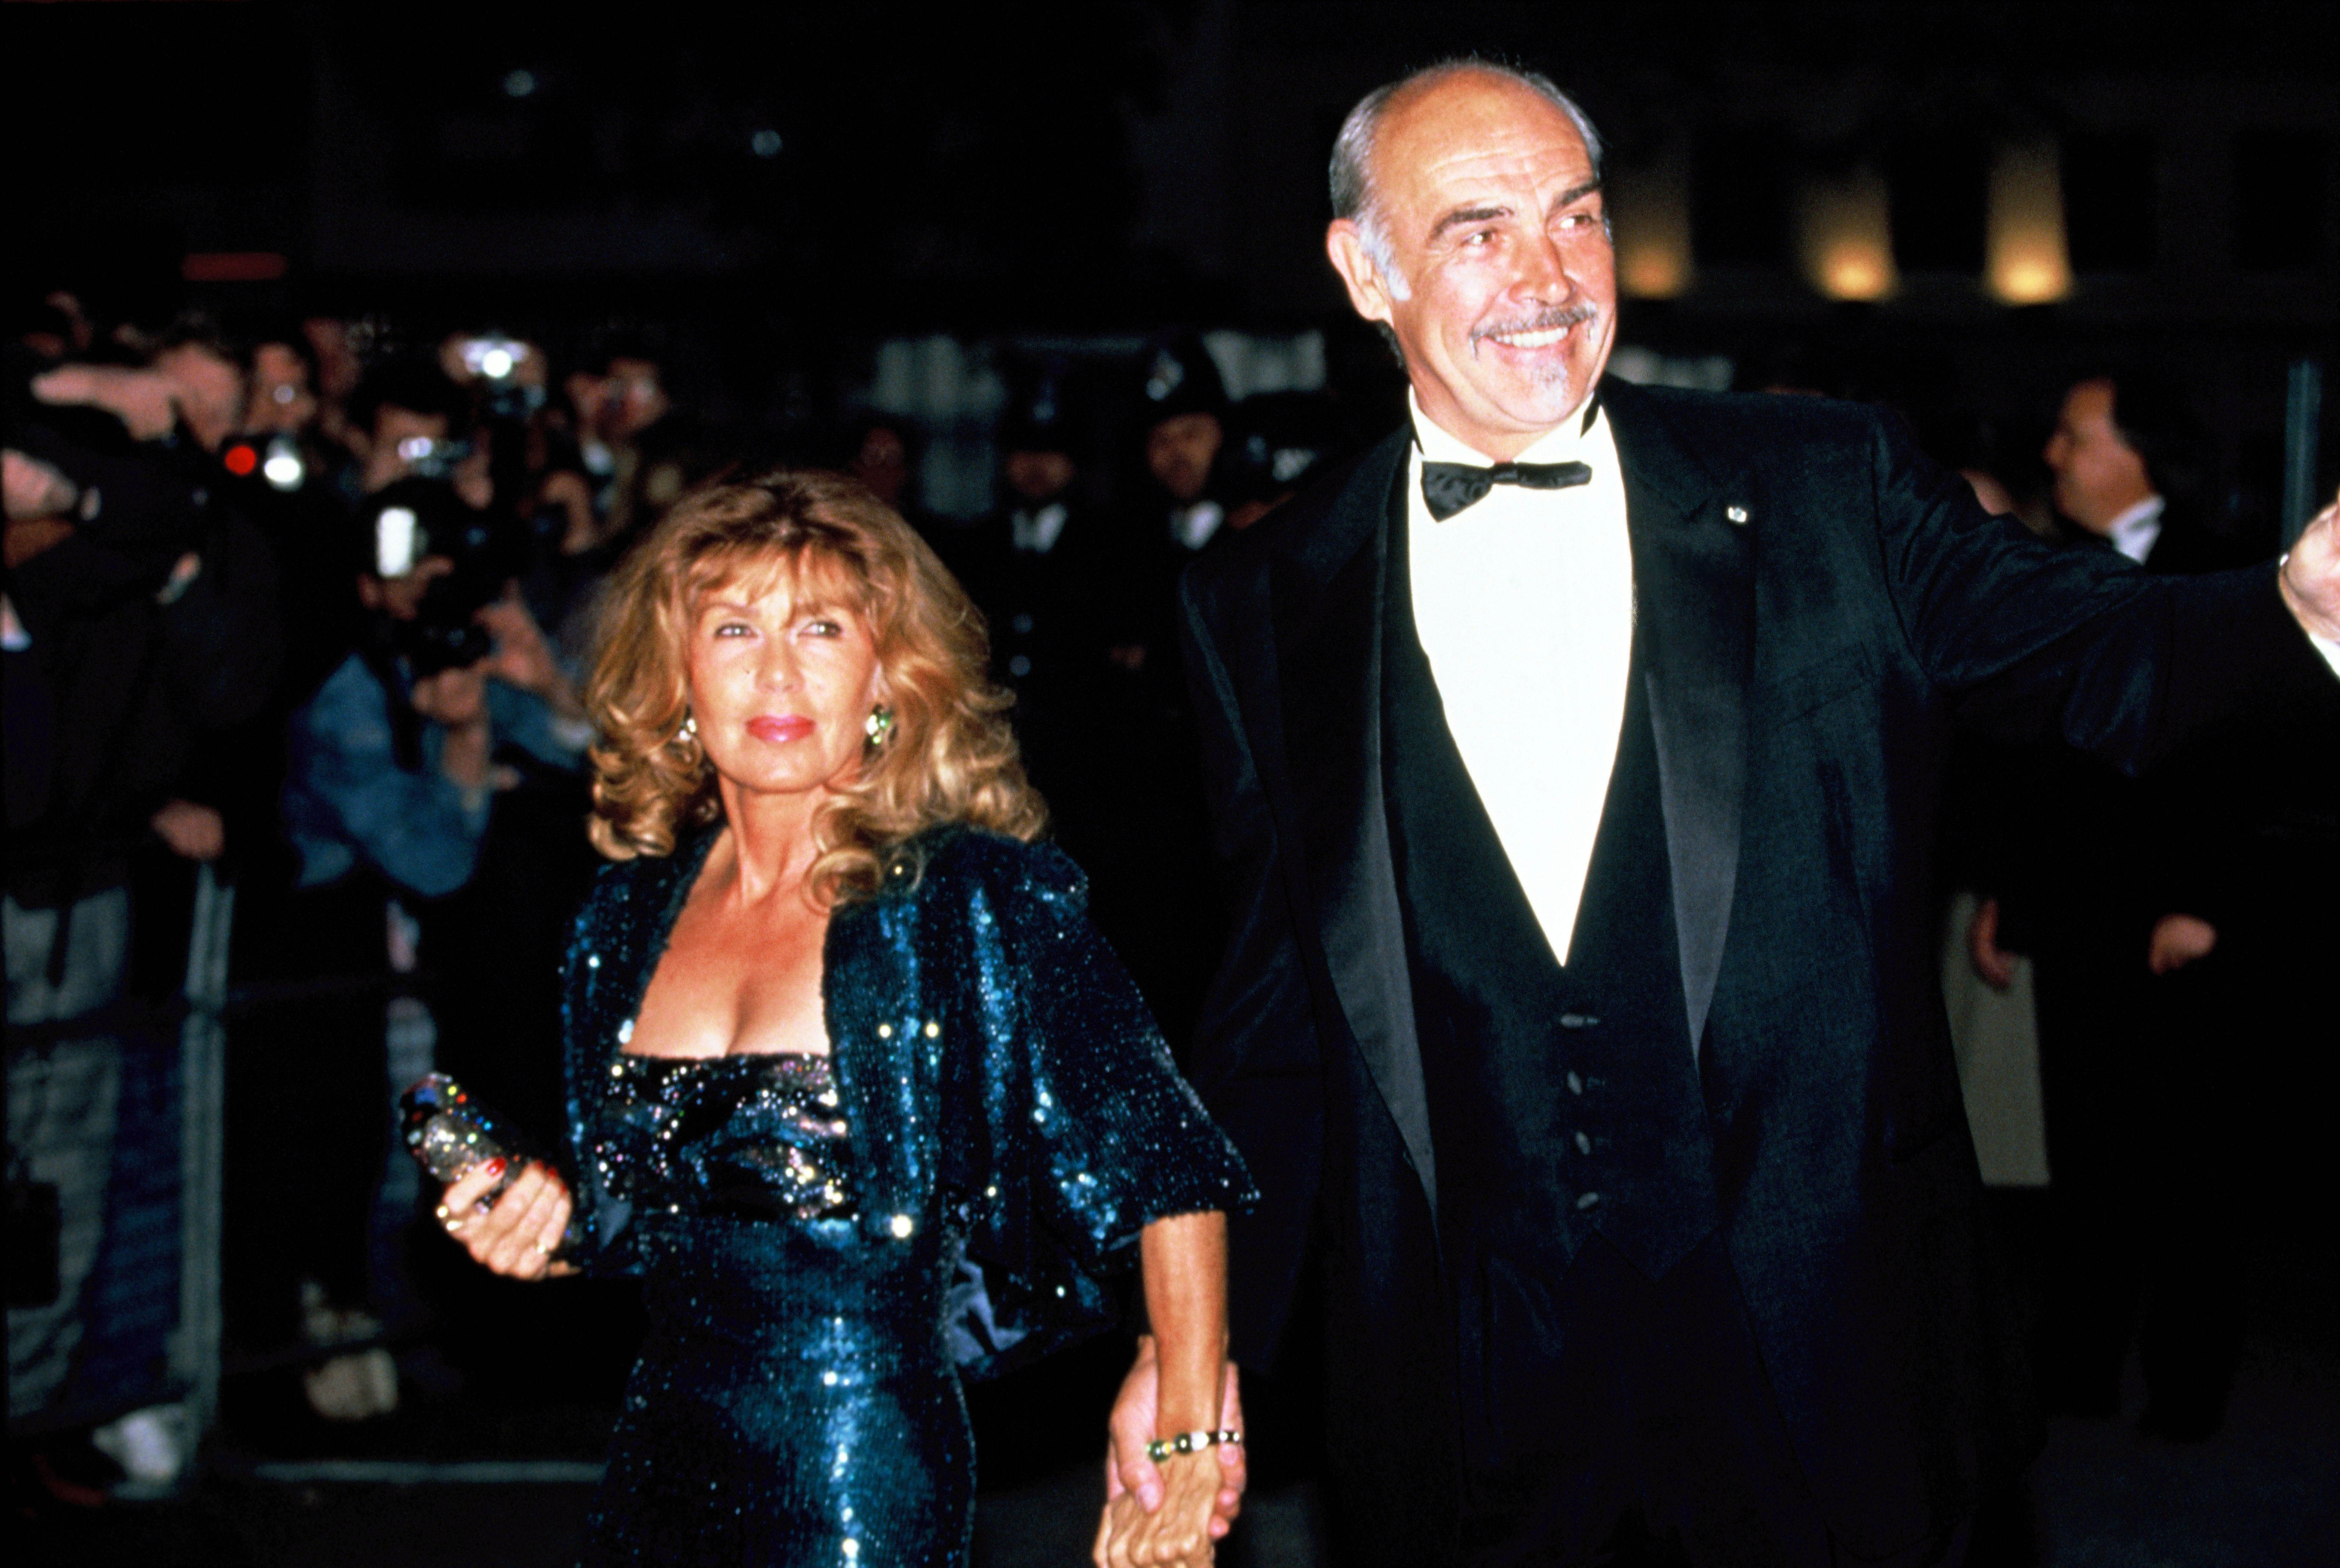  Sean Connery and Micheline Roquebrune attend the premiere of 'The Hunt for Red October' at the Odeon cinema on April 18, 1990, in London, England. | Source: Getty Images